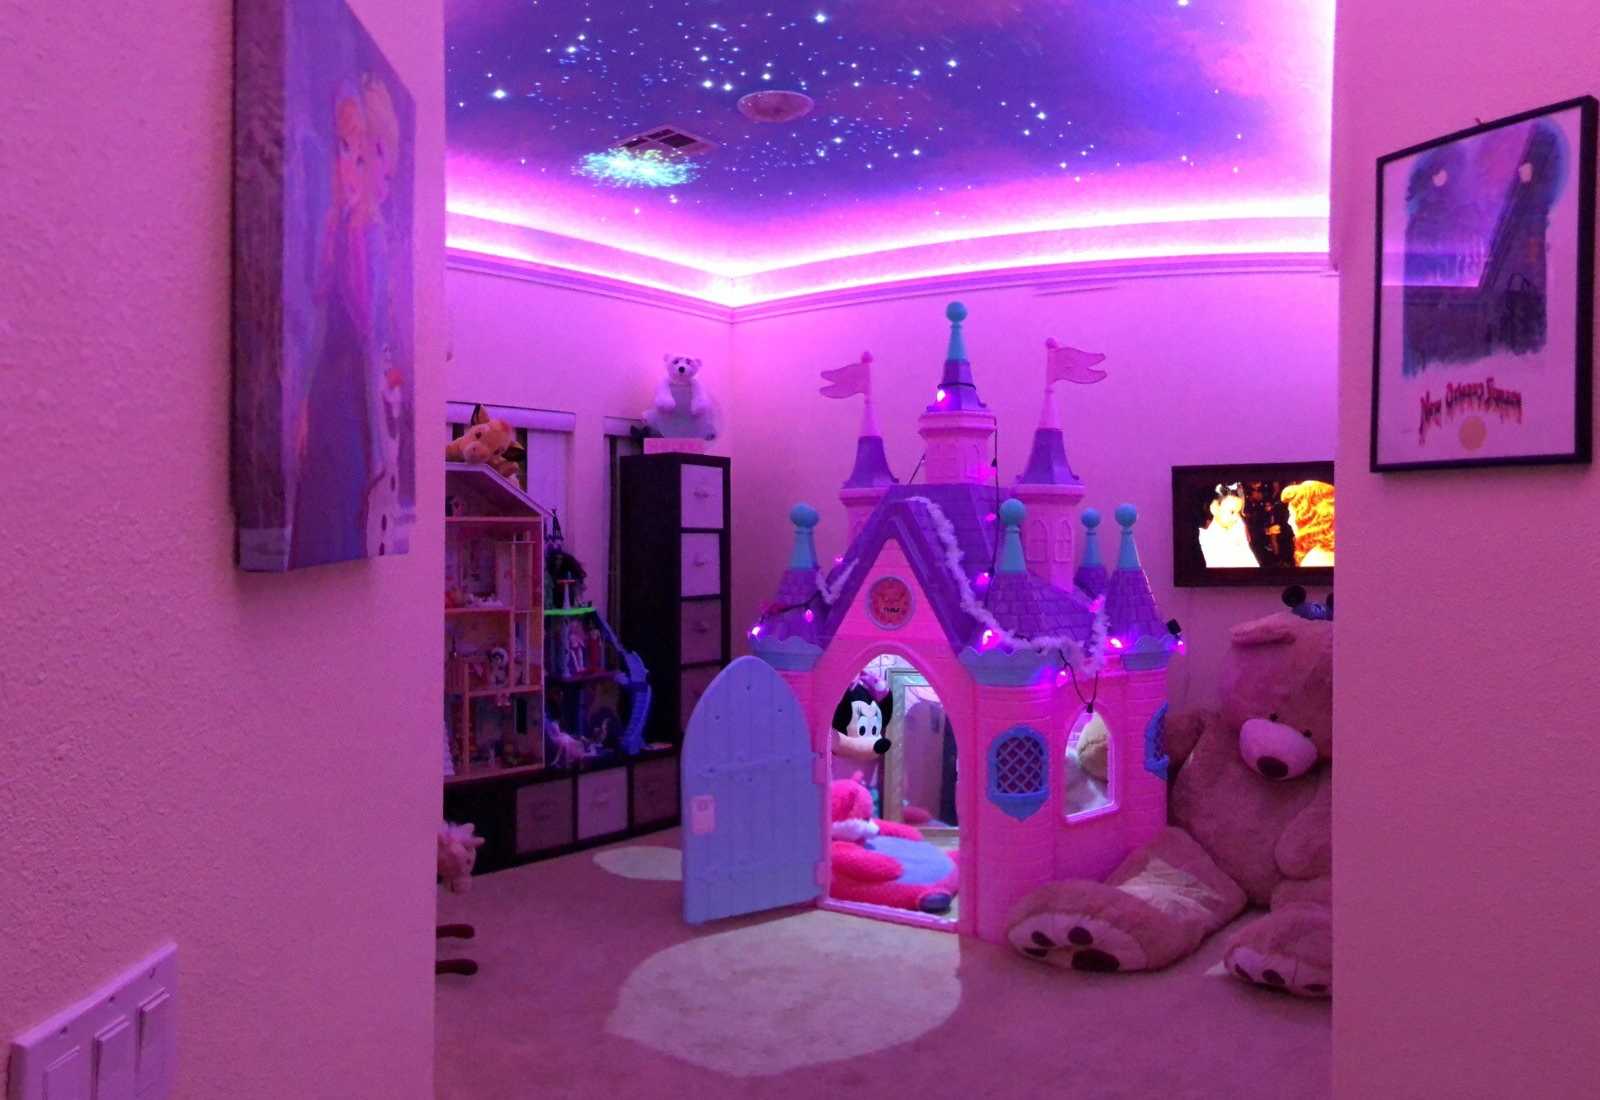 Little girl's Disney inspired room lit up in pink with pink castle in center of room